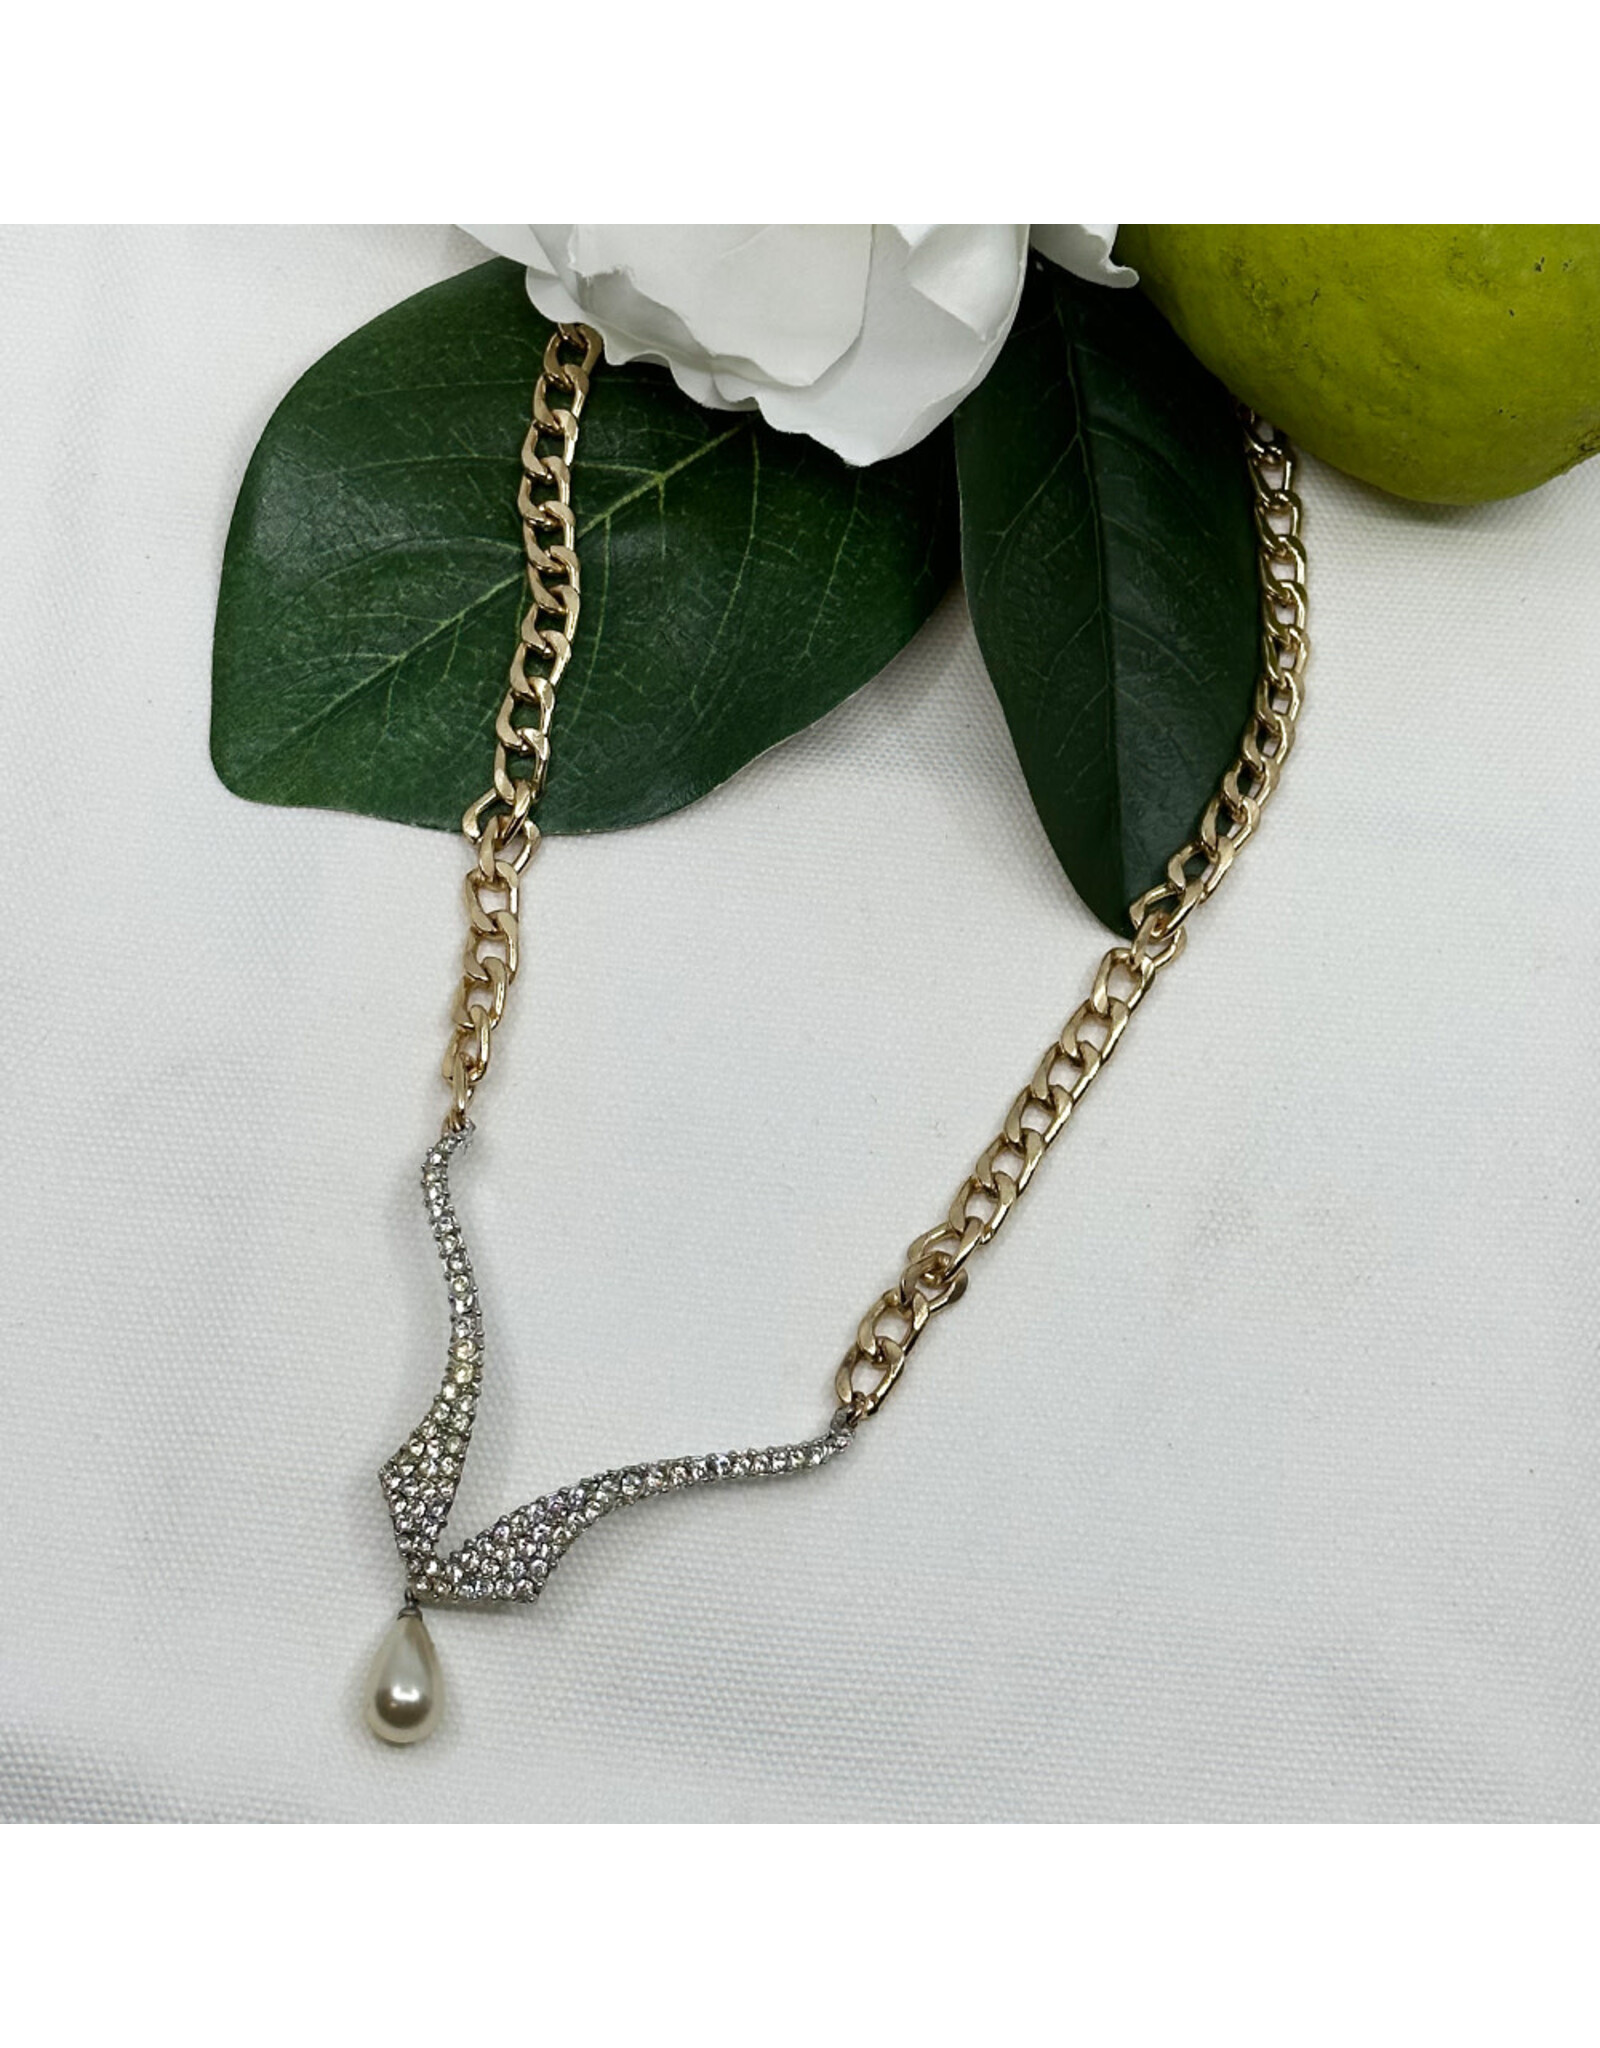 1950s V-Neck Rhinestone with Pearl on 1970s Chain Link Necklace